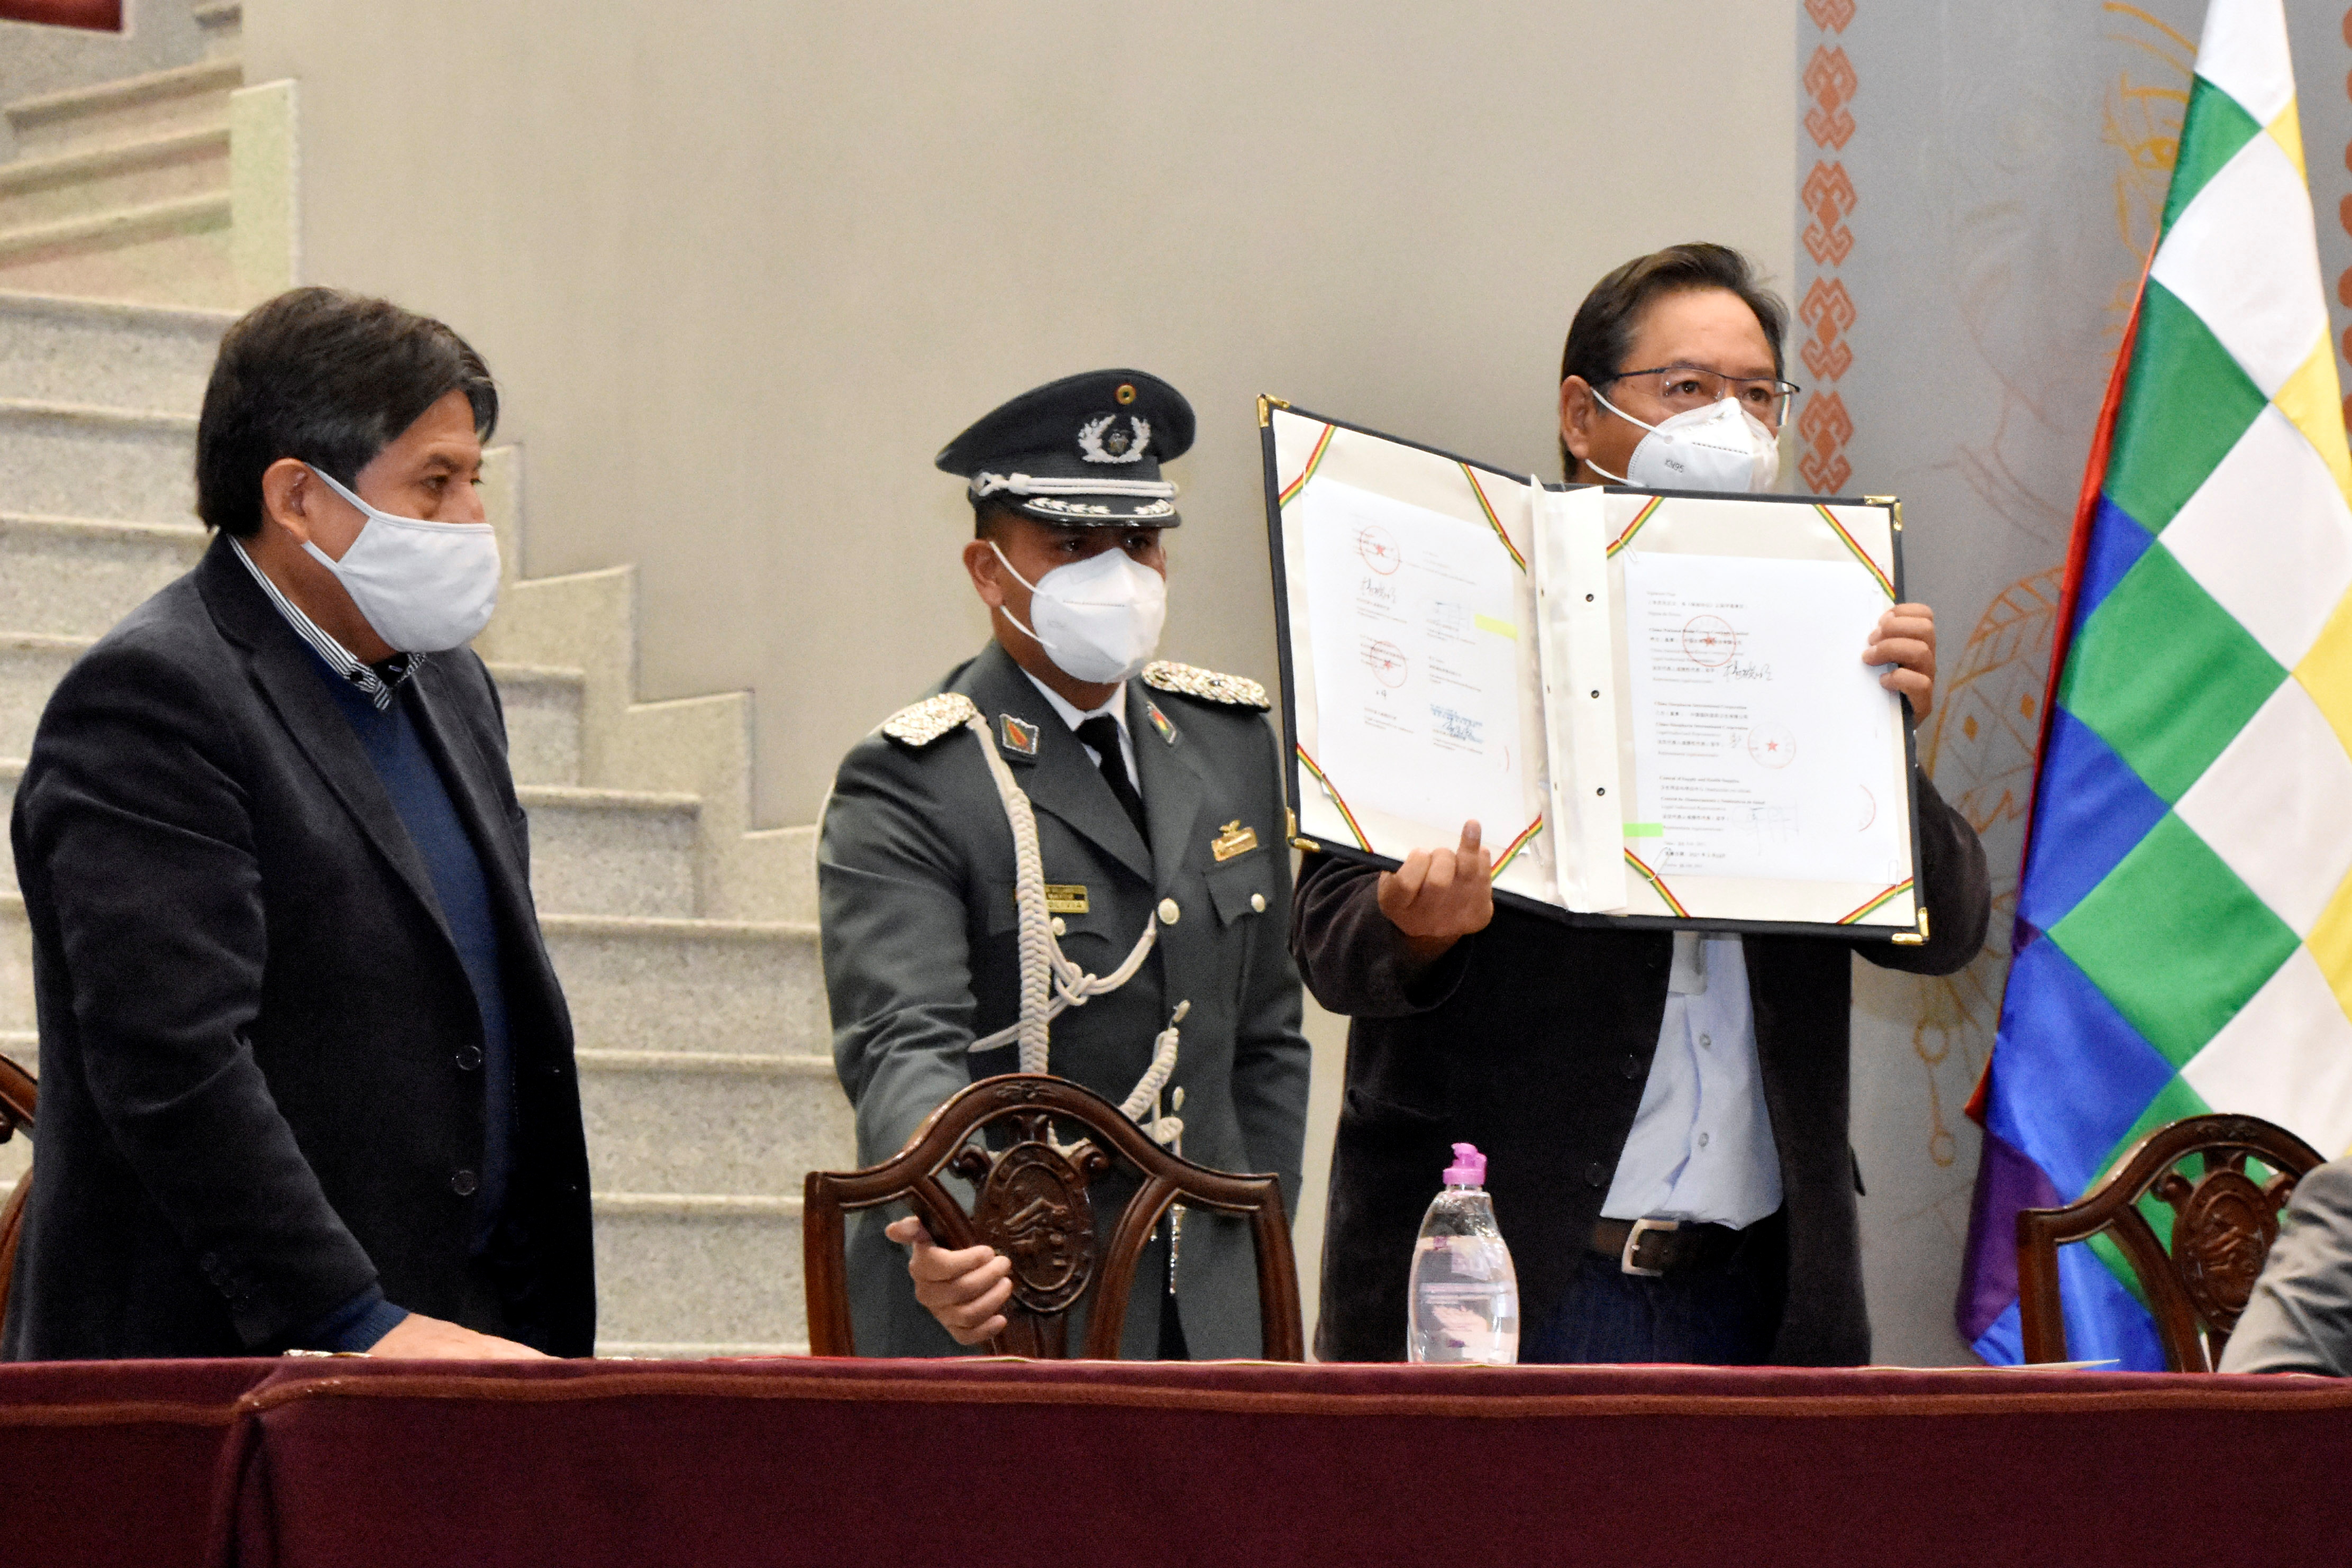 Bolivia's President Luis Arce holds the document of agreement with Chinese Sinopharm, locking in an initial supply of half a million doses of the company's vaccine against the coronavirus disease (COVID-19), as Vice President David Choquehuanca looks on at the Casa Grande del Pueblo palace in La Paz, Bolivia, February 11, 2021. Courtesy of Bolivian Presidency/Jorge Mamani/Handout via REUTERS